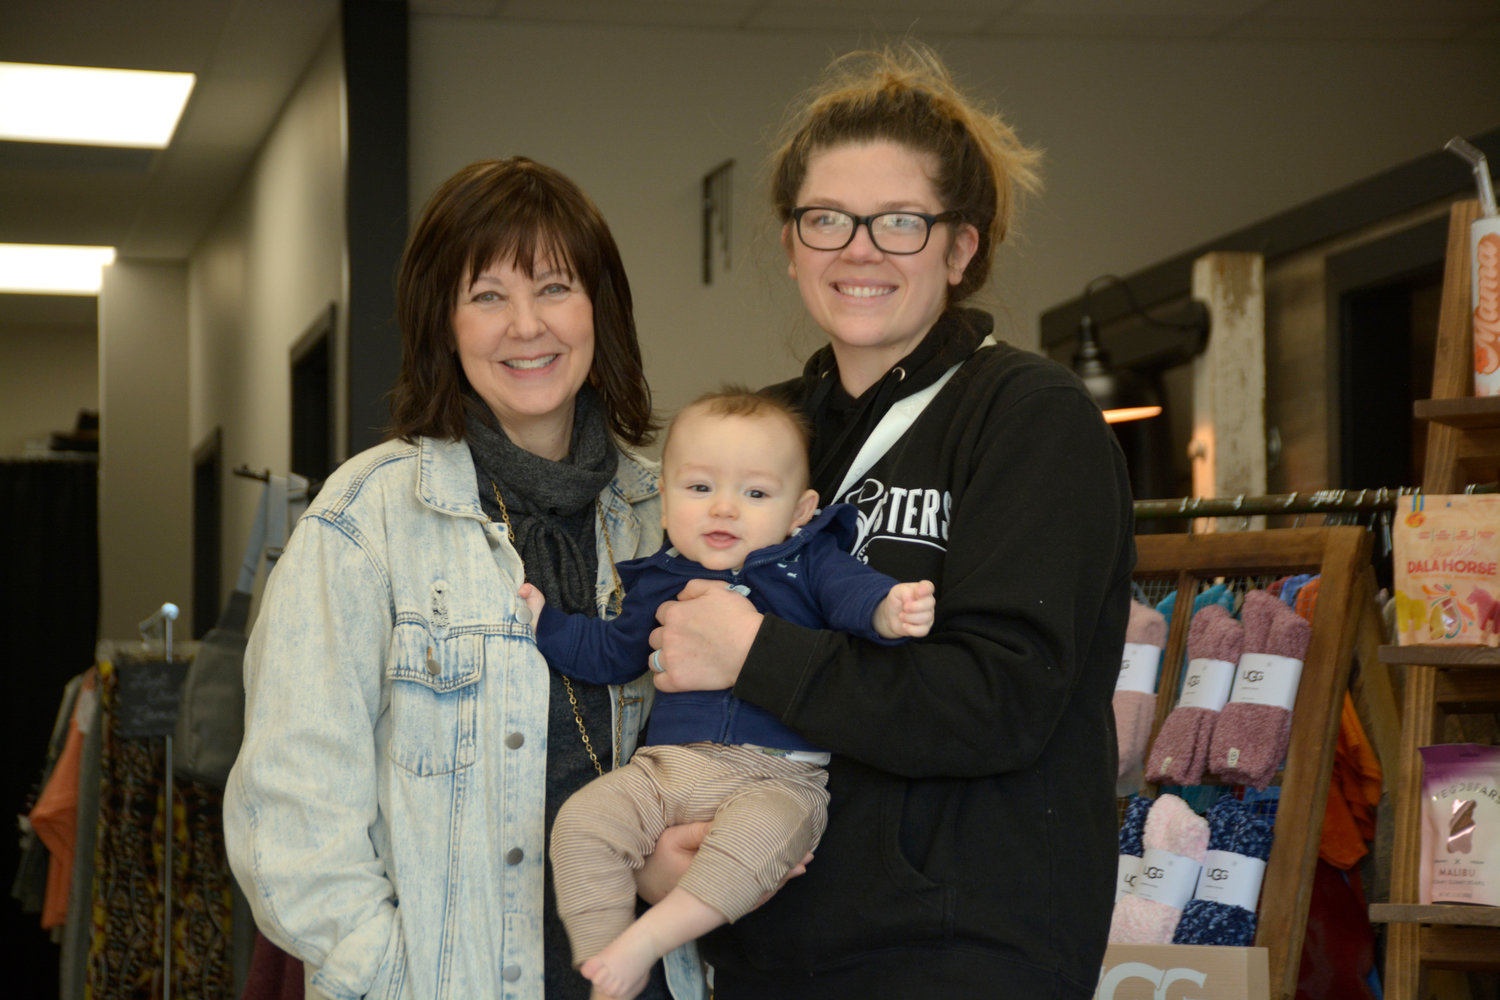 Heidi Potter and Nanette Potter pose with Nanette’s 6-month-old son, William Potter.